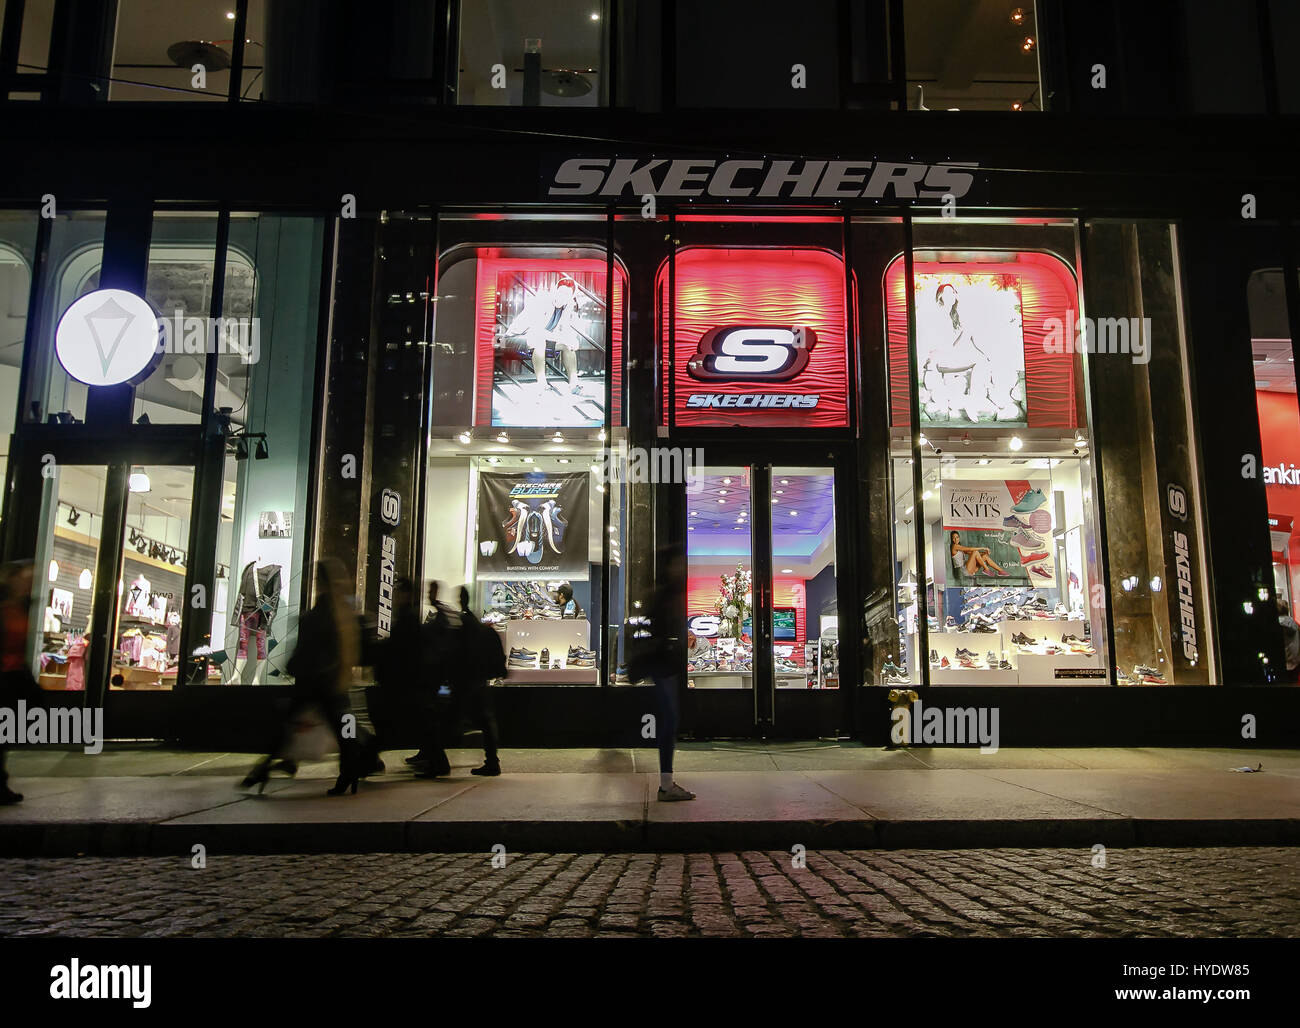 Skechers Shoe Store High Resolution Stock Photography and Images - Alamy